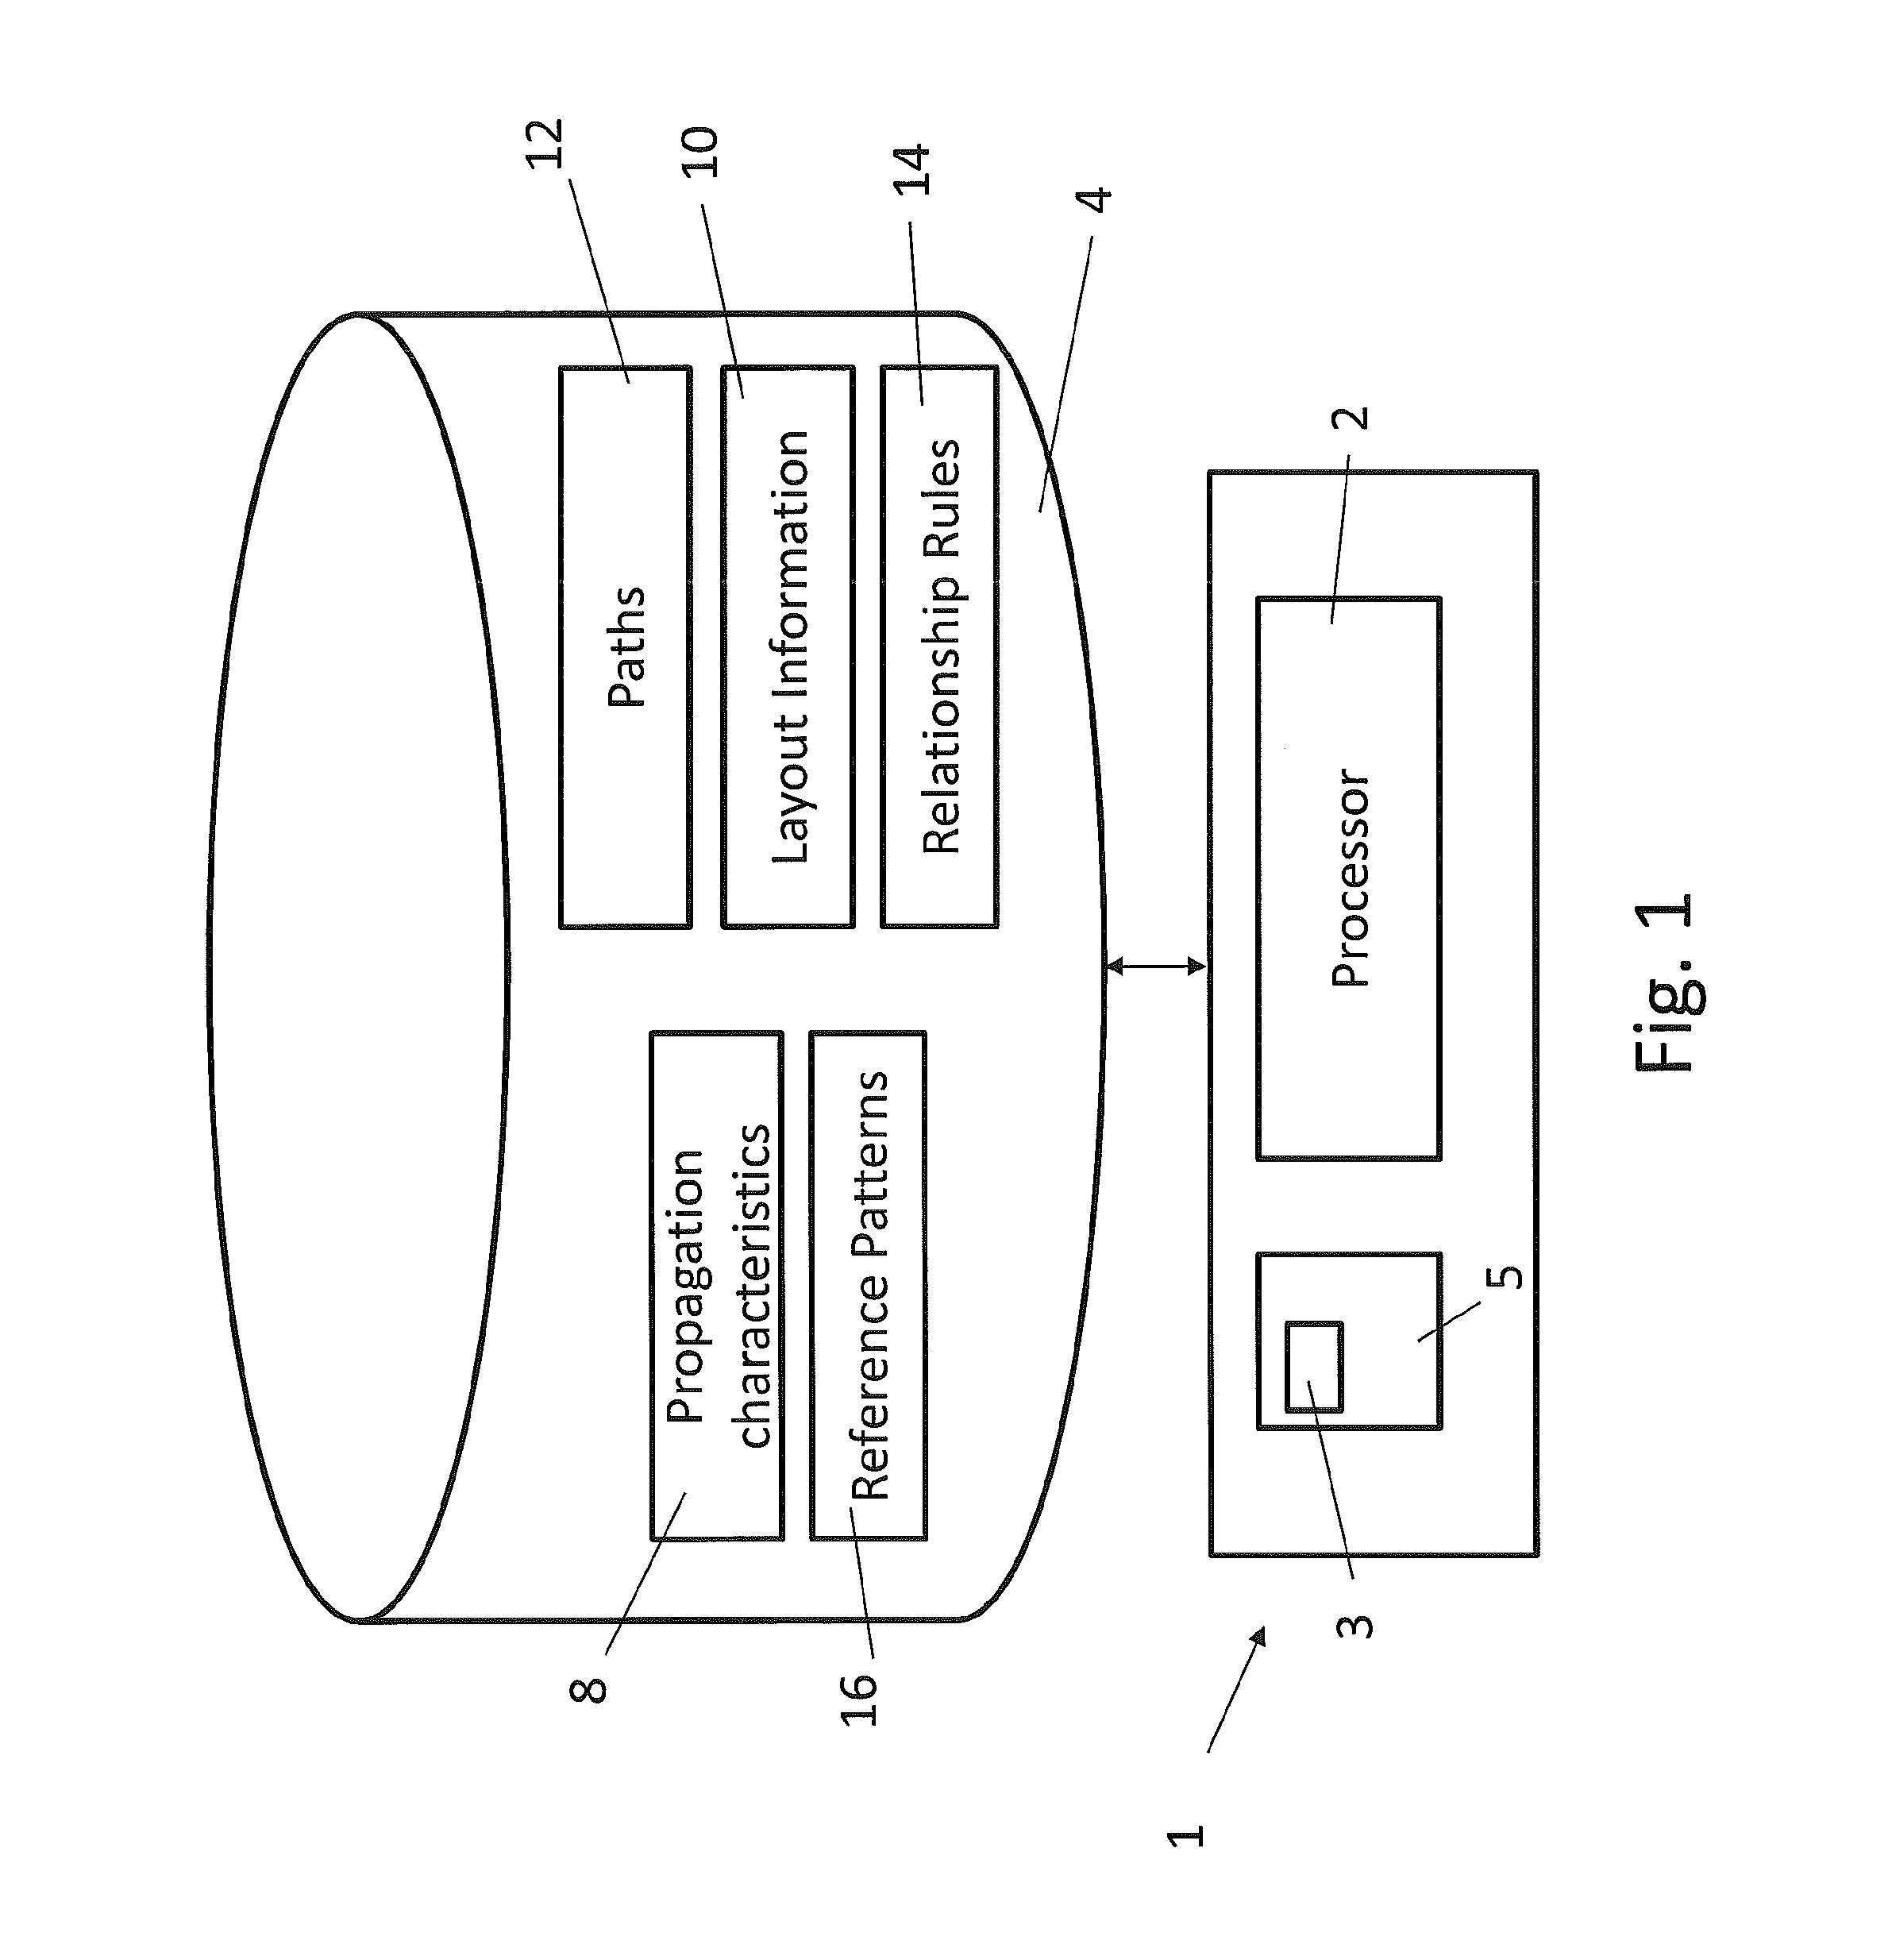 Method of estimating position of a device